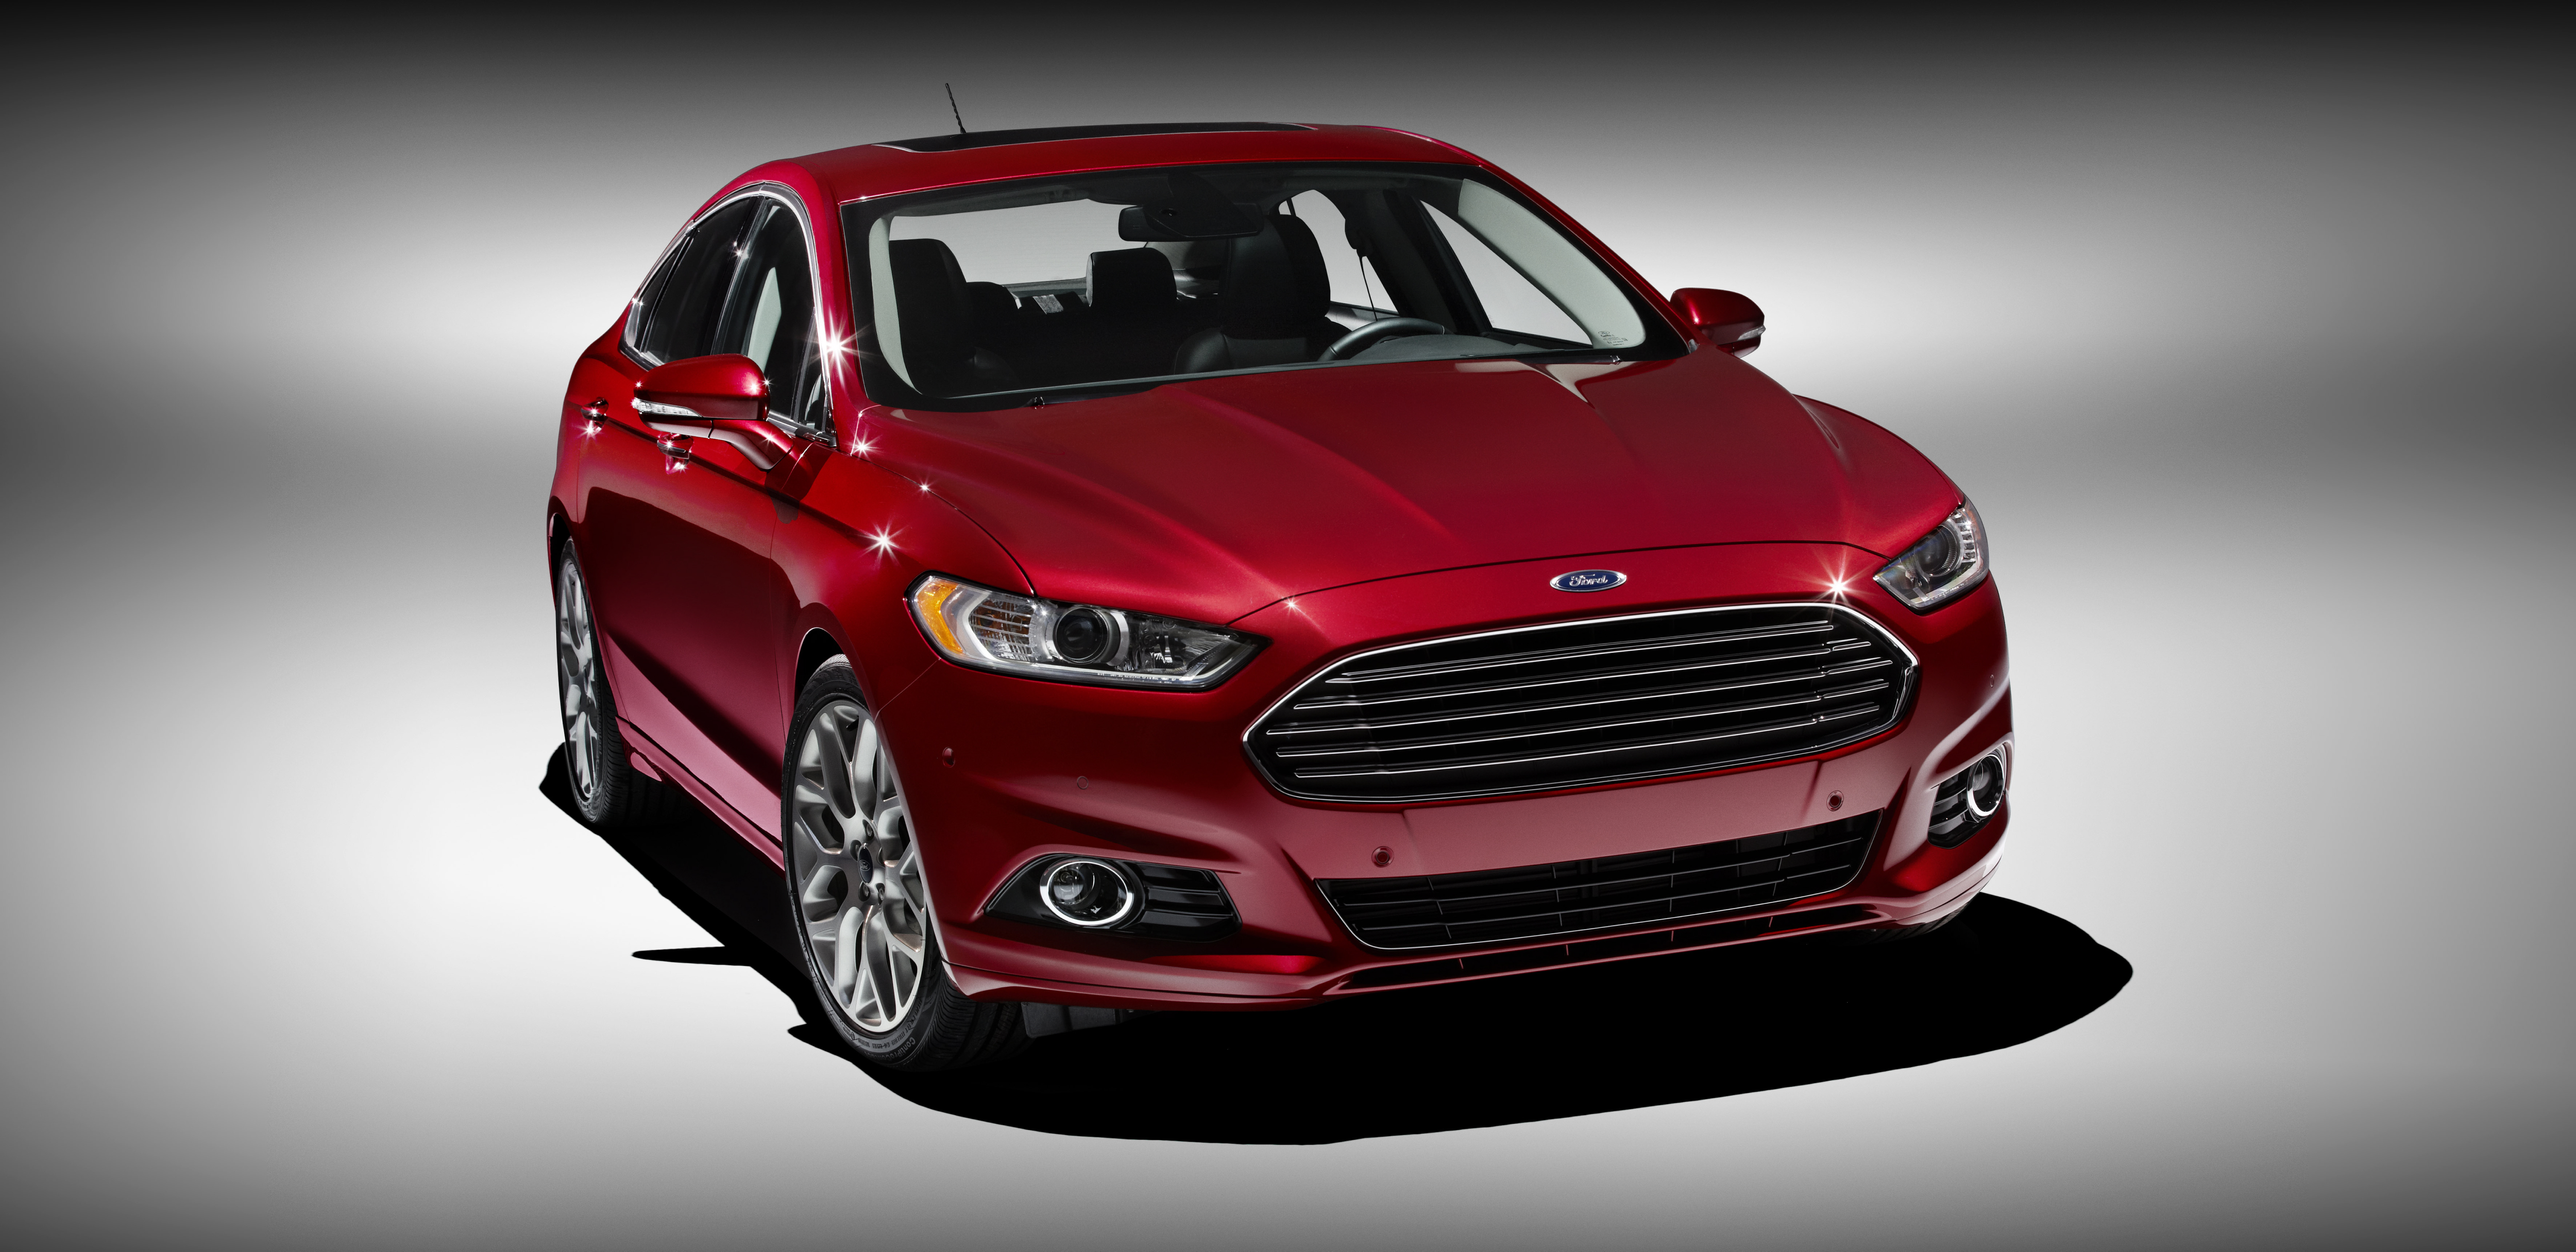 2013 Ford fusion recall engine fire #2